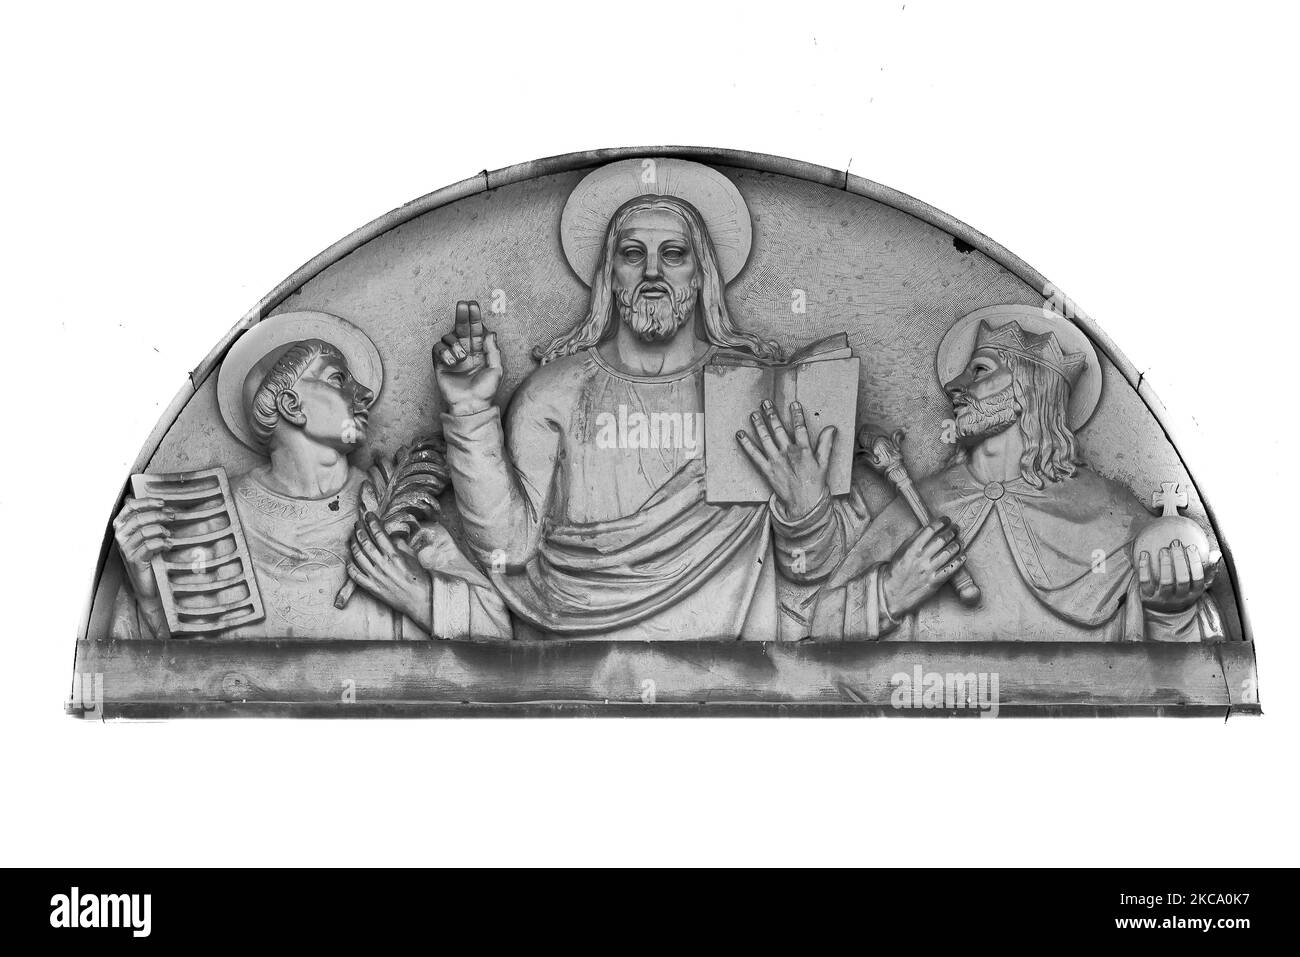 Pediment of Lund cathedral with Jesus Christ, Saint Canute and Saint Lawrence, Sweden, November 3, 2021 Stock Photo